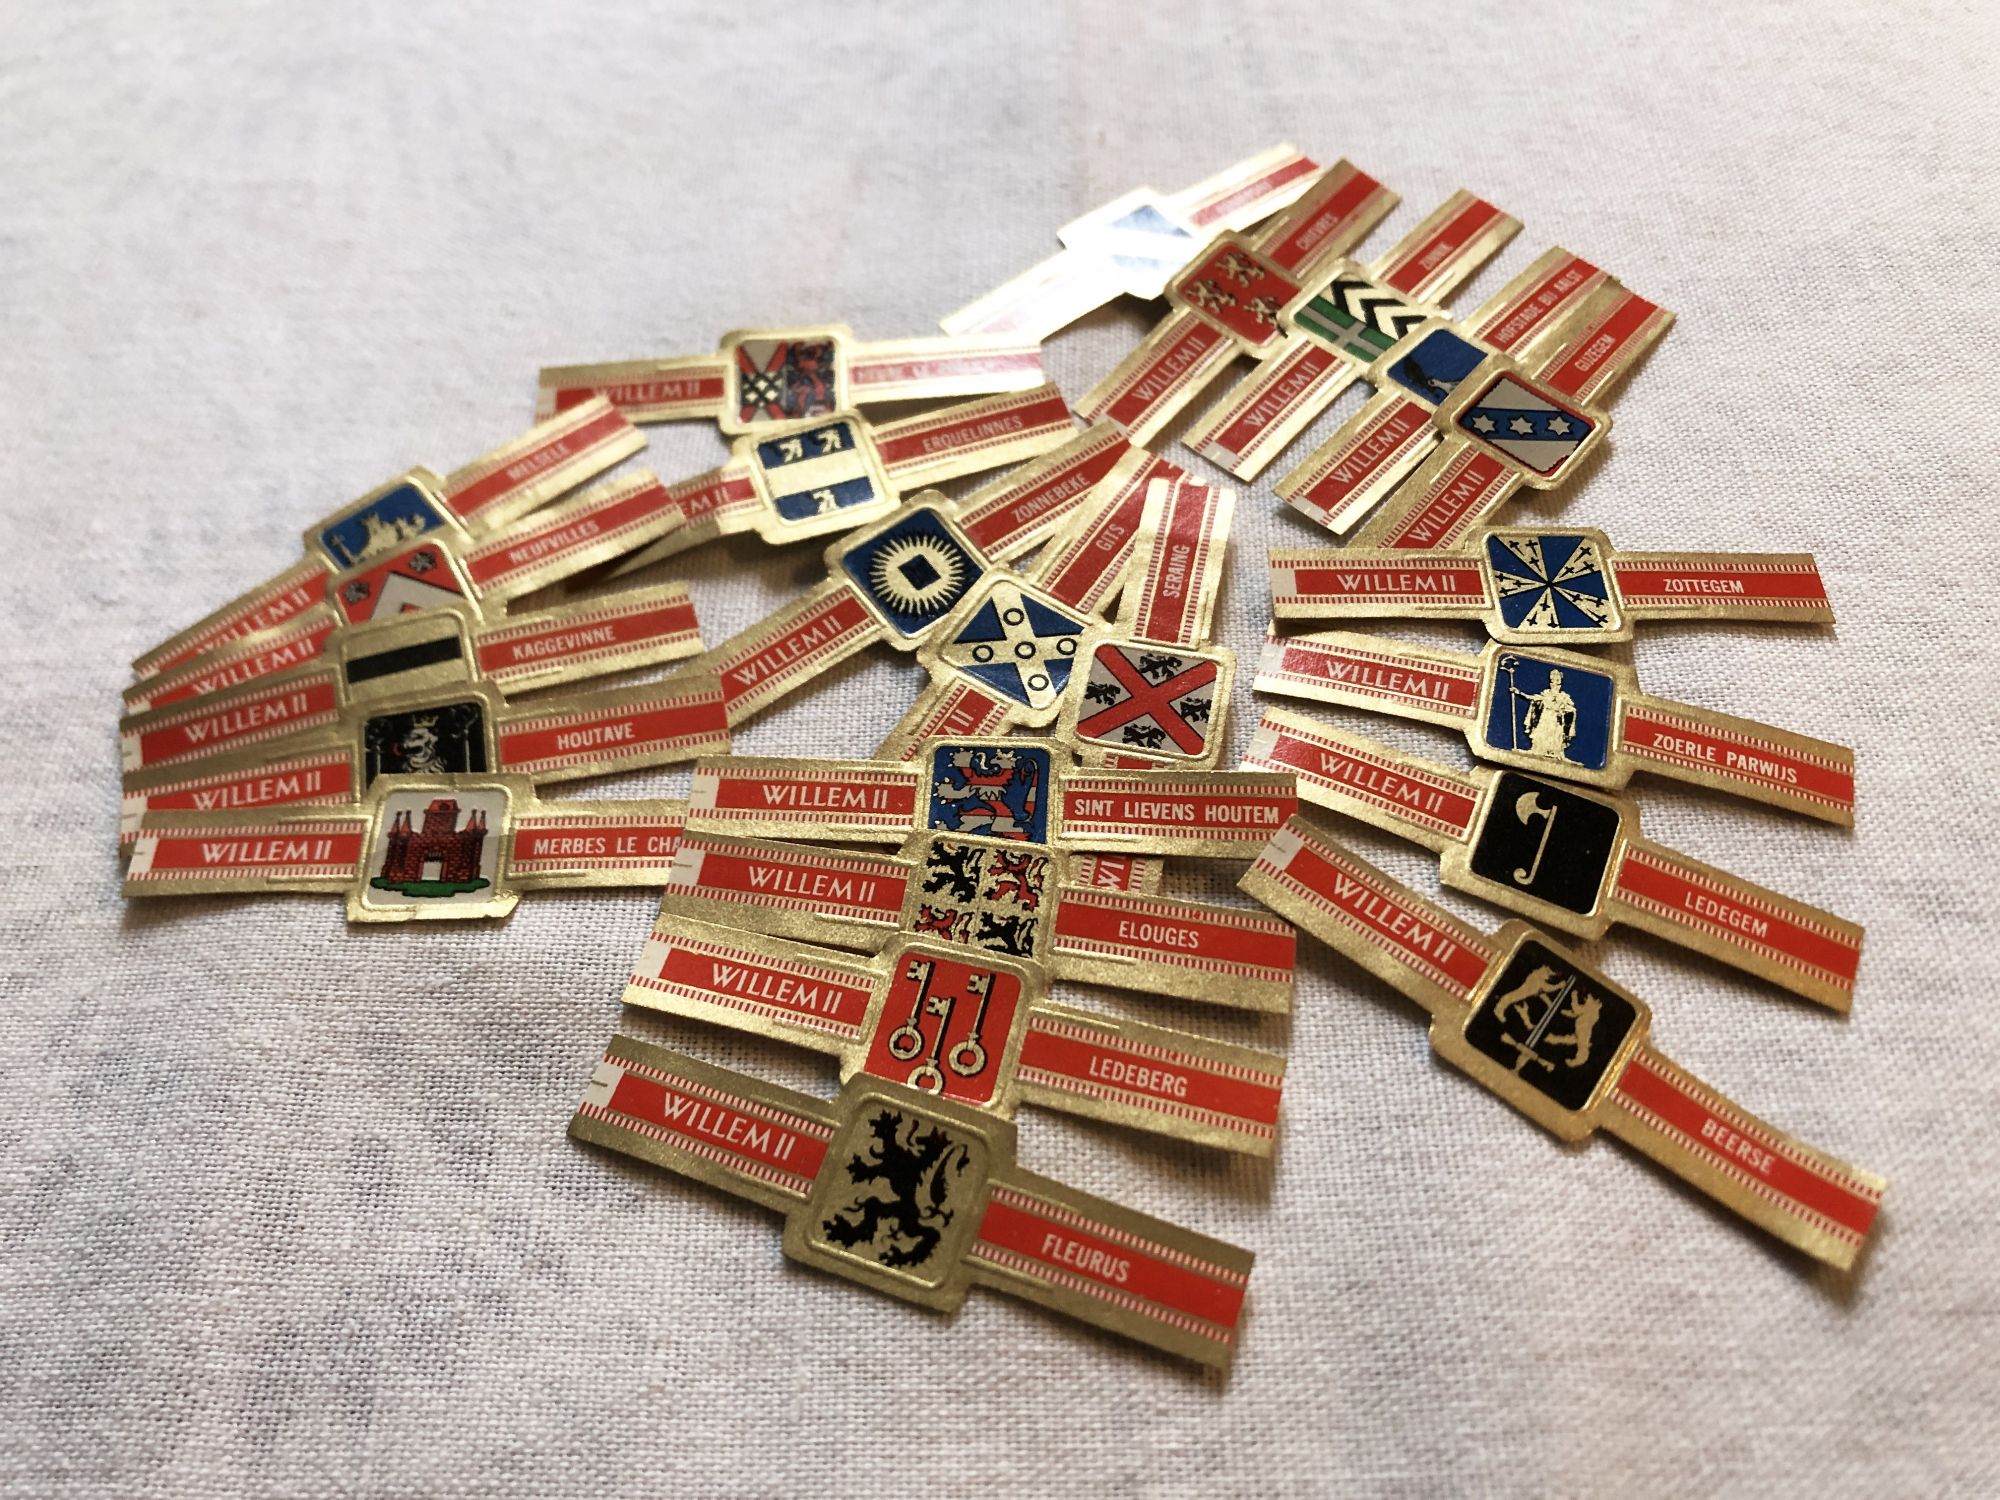 Set of 22 cigar bands - Willem - Dutch brand of cigars from 1960s